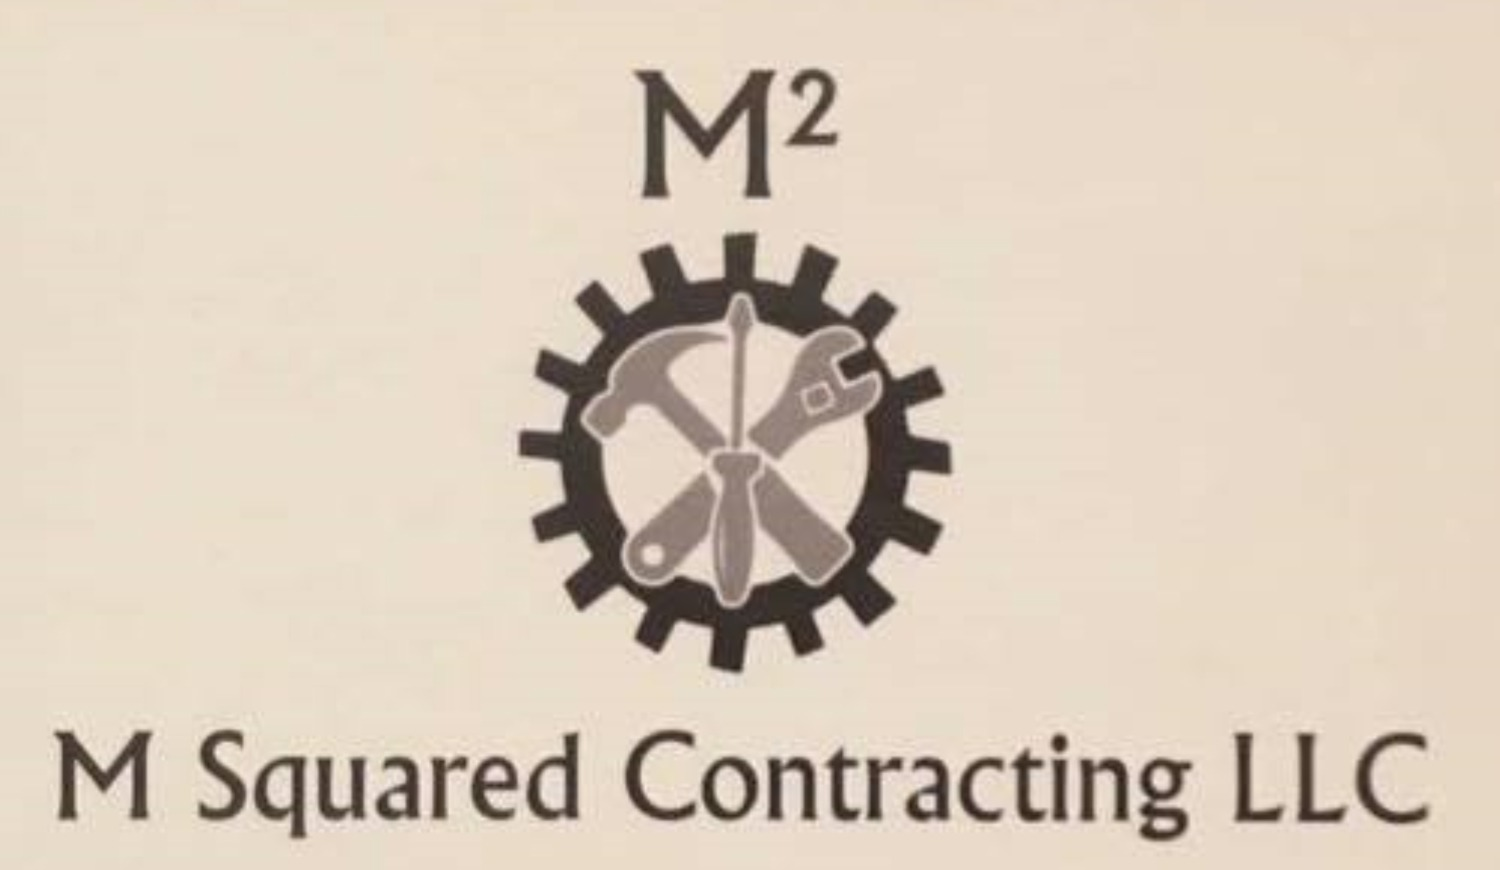 Font for M Squared Contracting LLC?